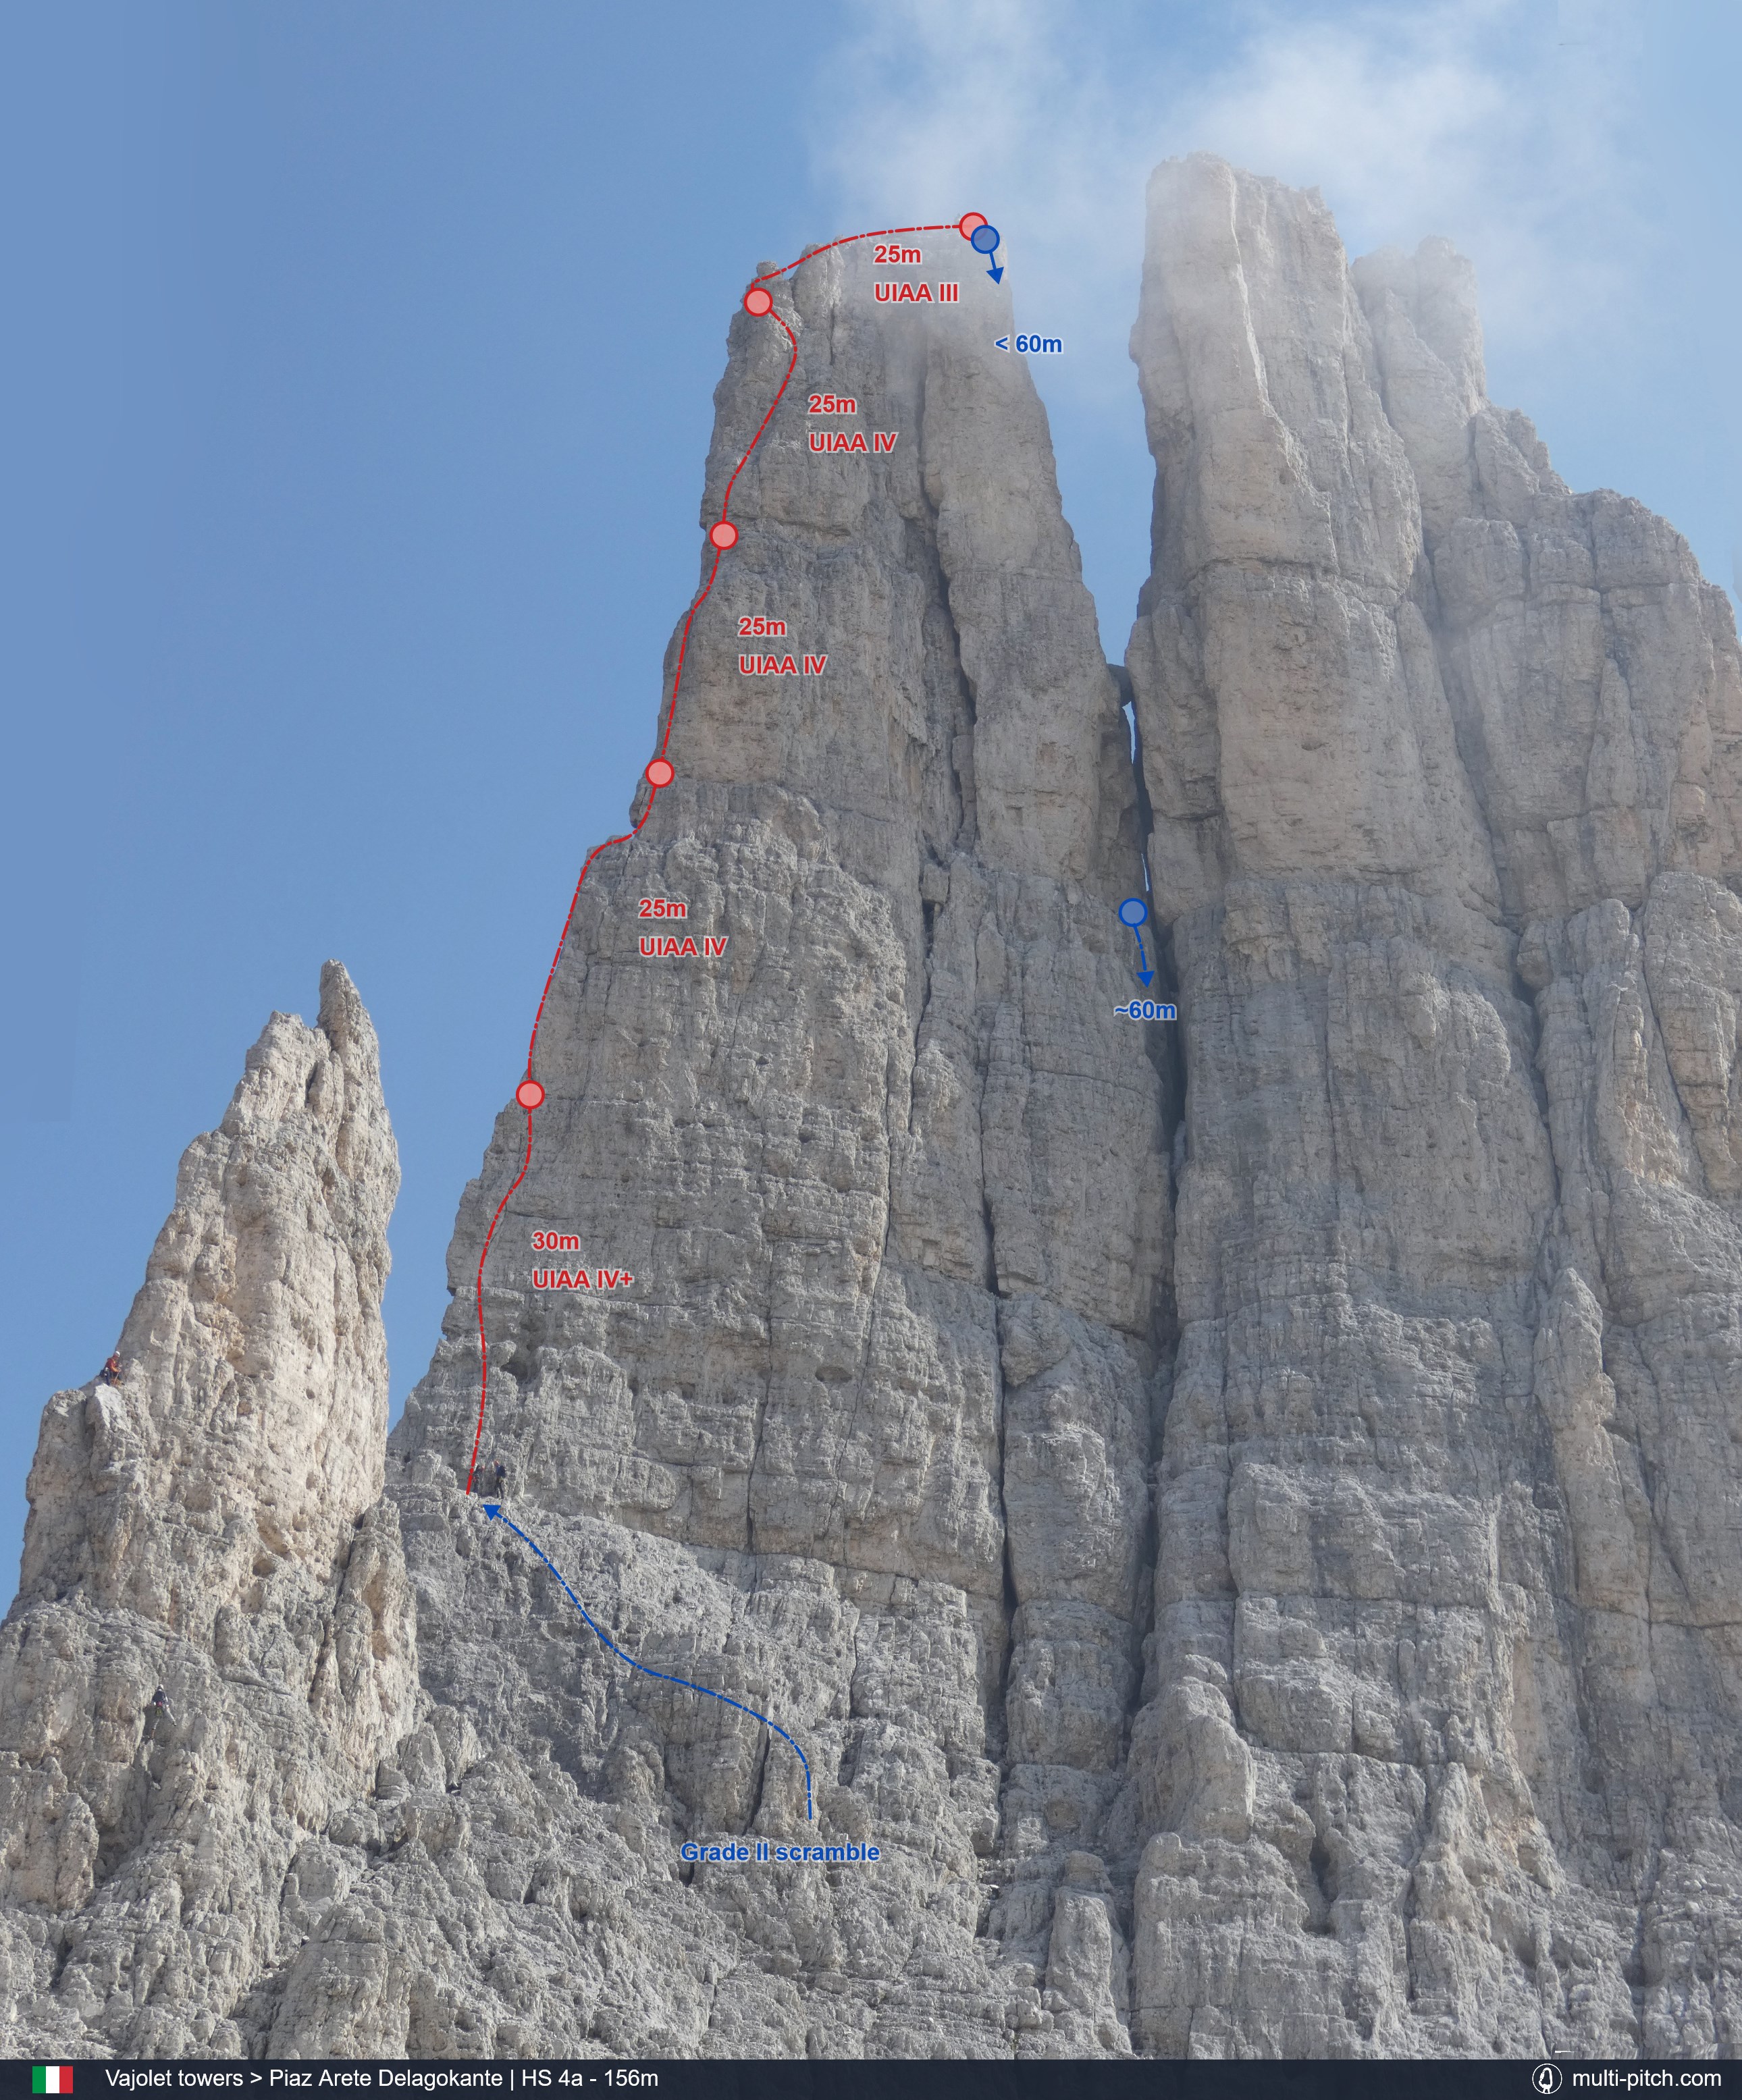 The Vejolet Towers topo for Piaz Arete